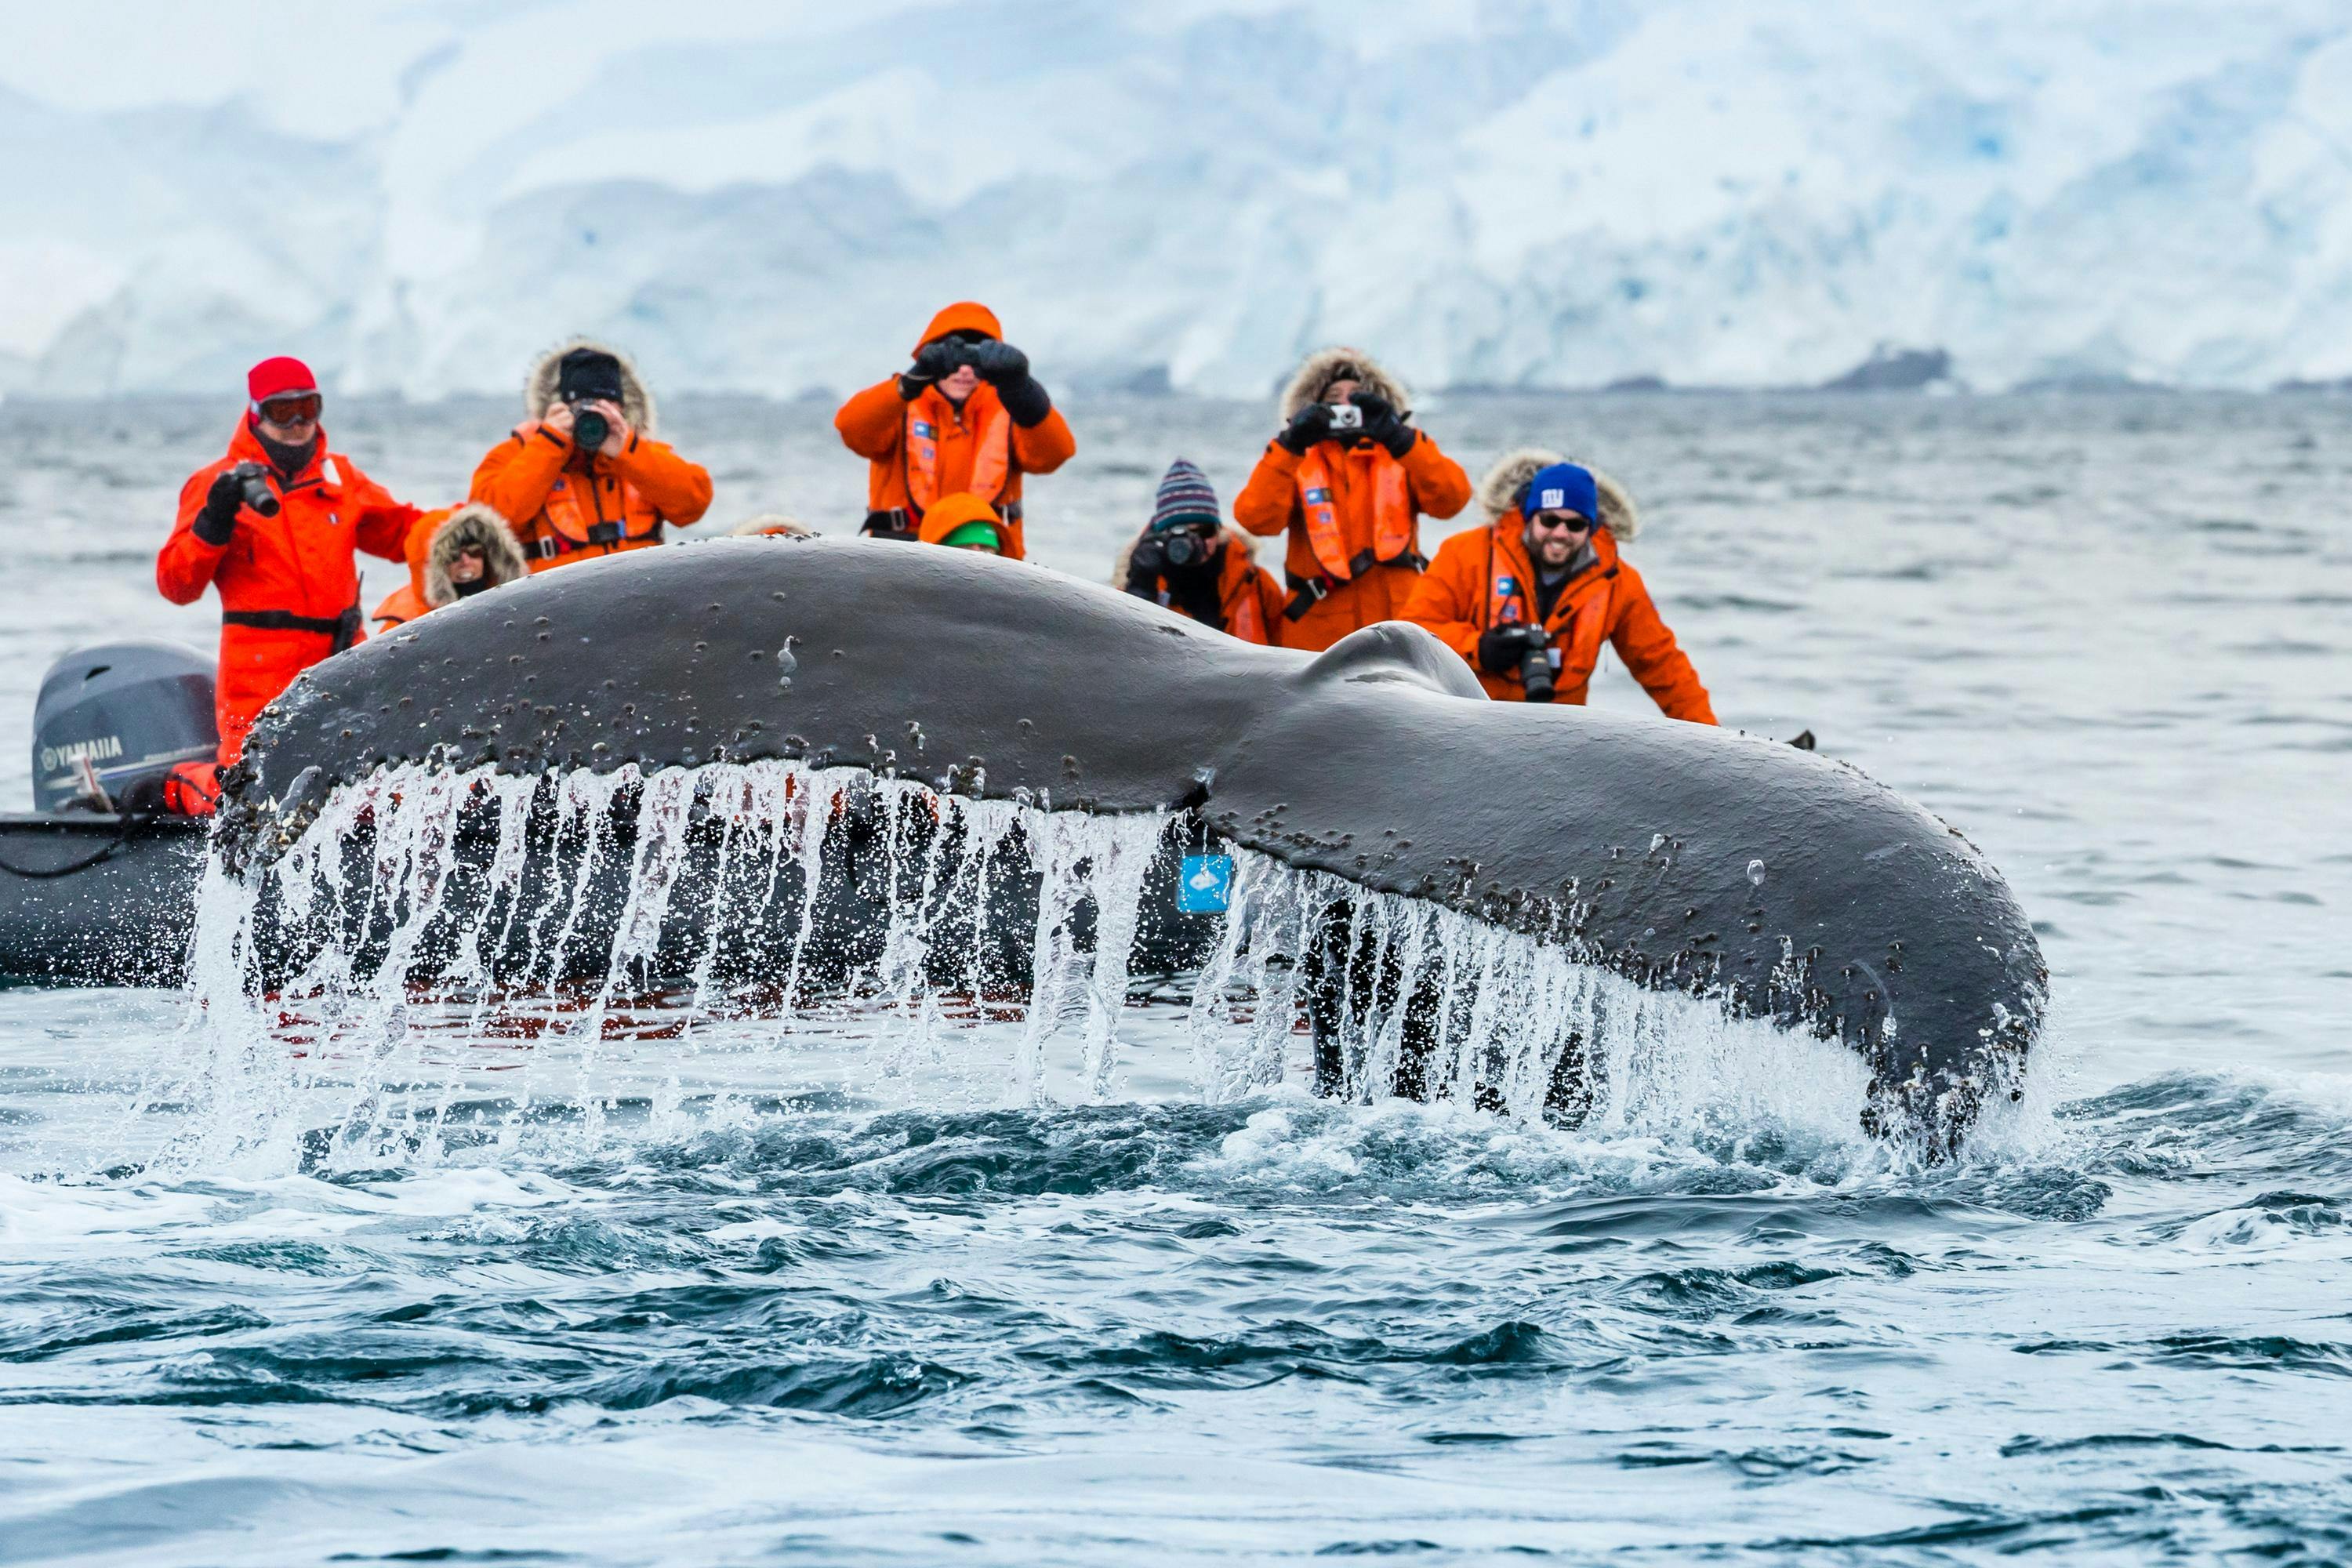 Guests exploring by zodiac have a thrilling encounter as a Humpback Whale dives and shows off his fluke at Paradise Harbor, Antarctic Peninsula, Southern Ocean, Antarctica.